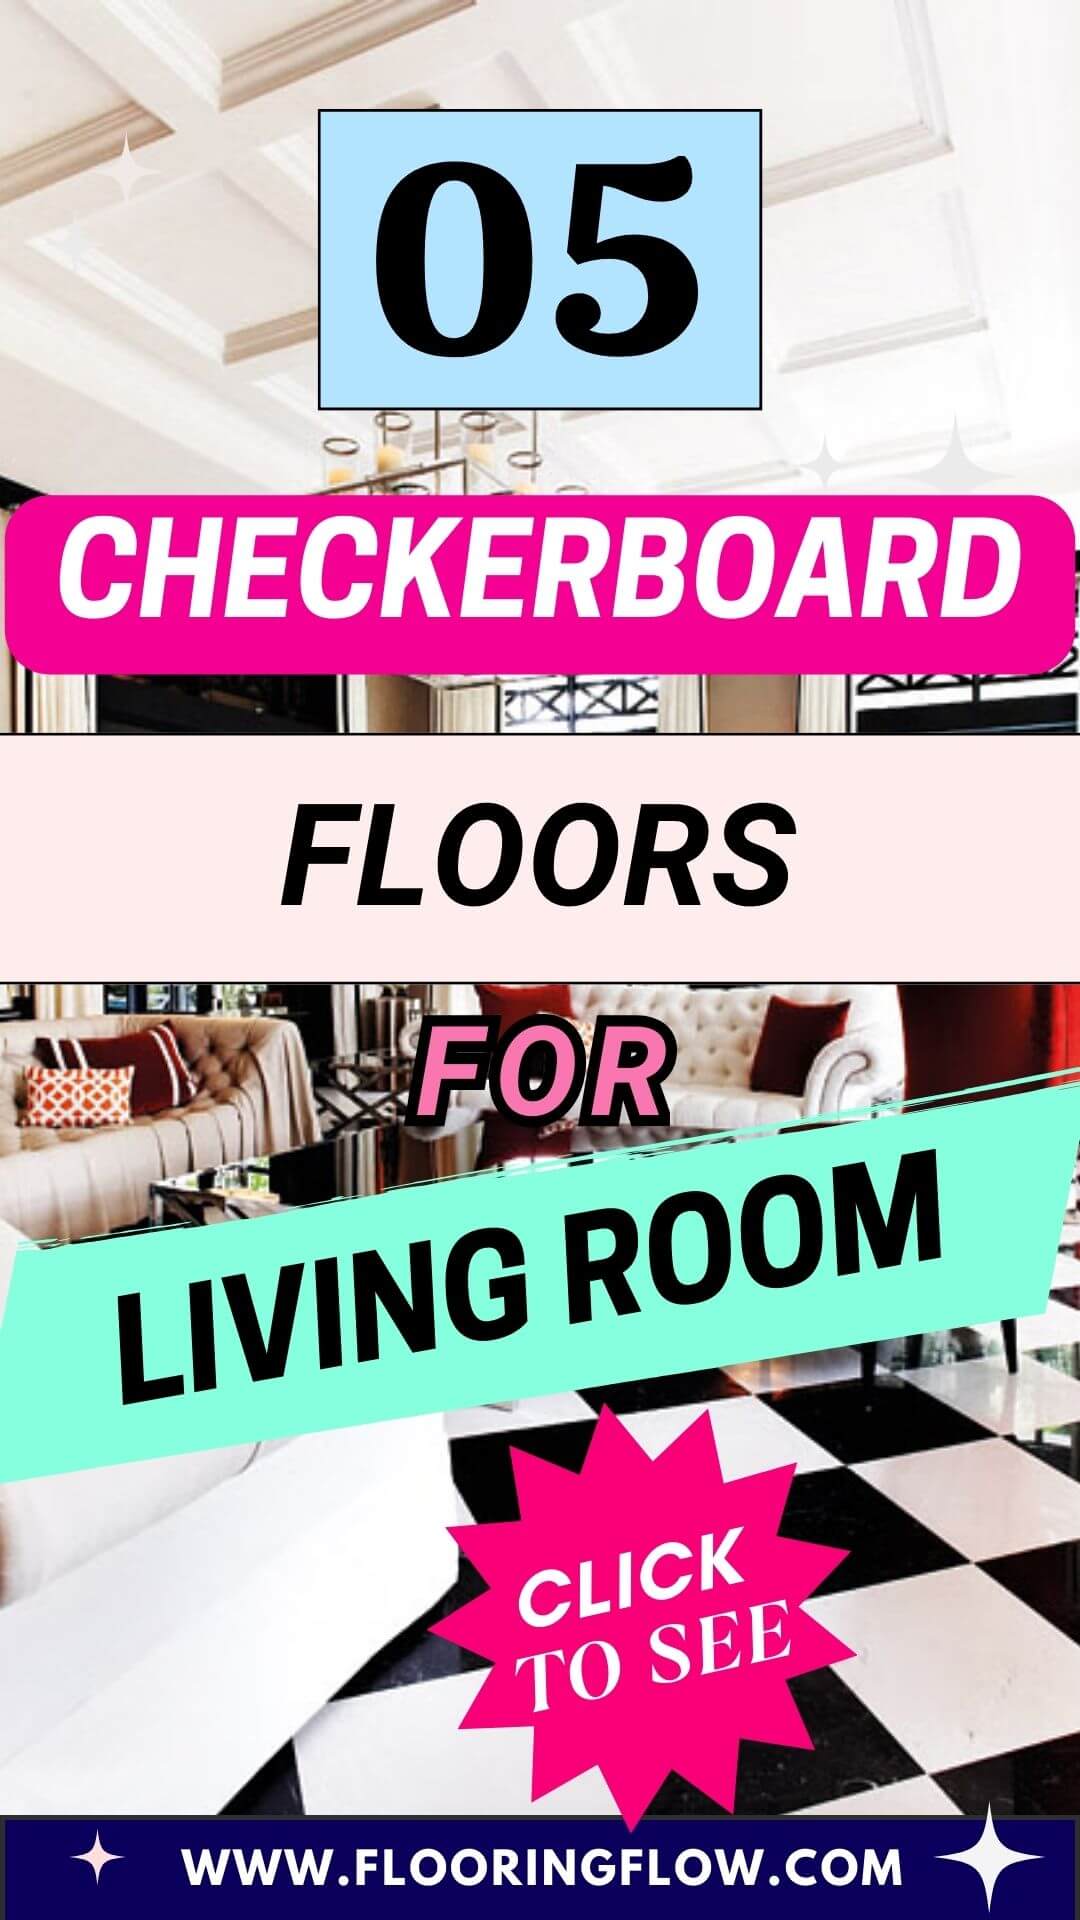 Checkerboard floors for living room